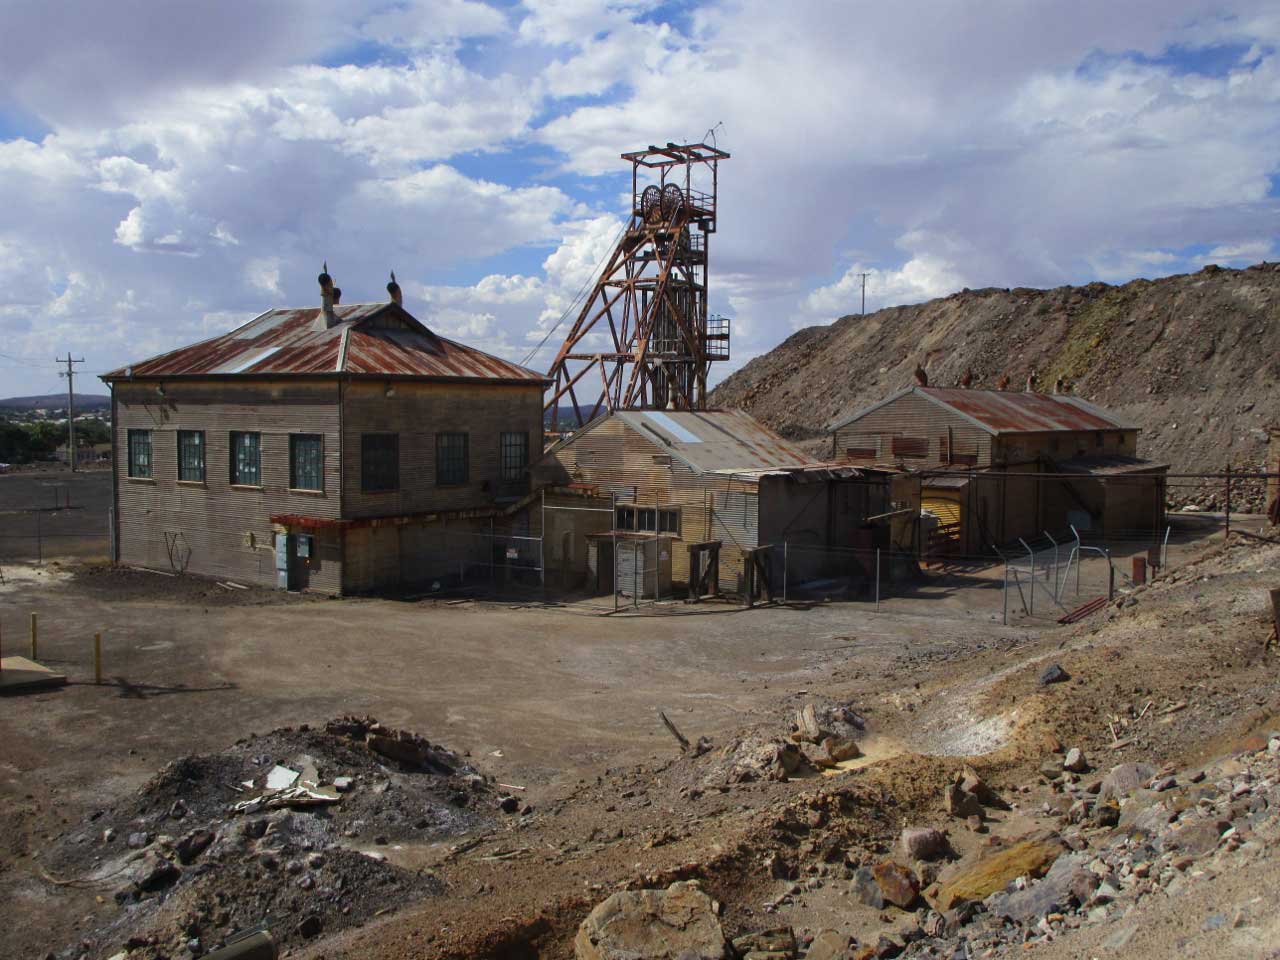 Abandoned mine buildings surrounded by piles of tailings